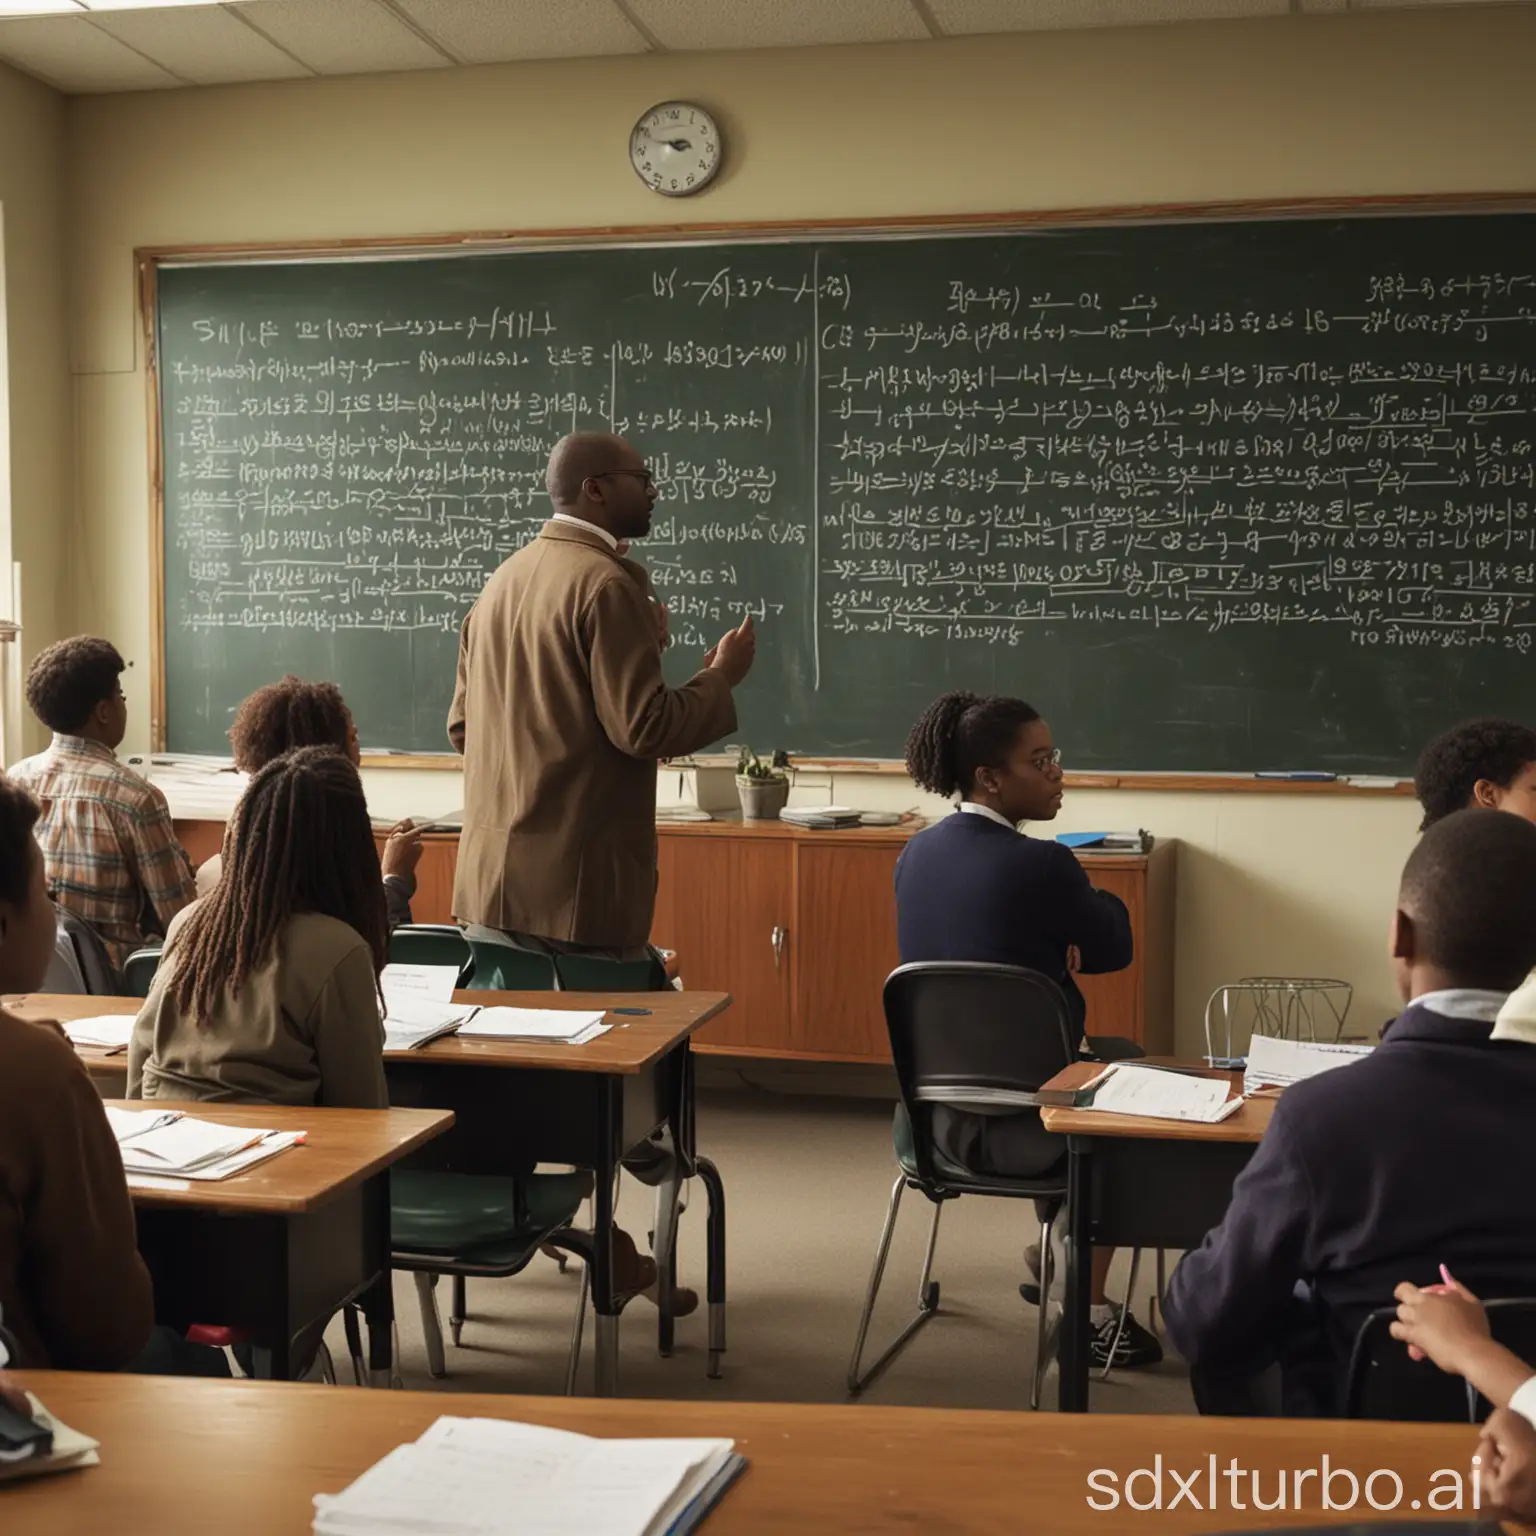 Diverse-Students-Engaged-in-Classroom-Learning-with-Professors